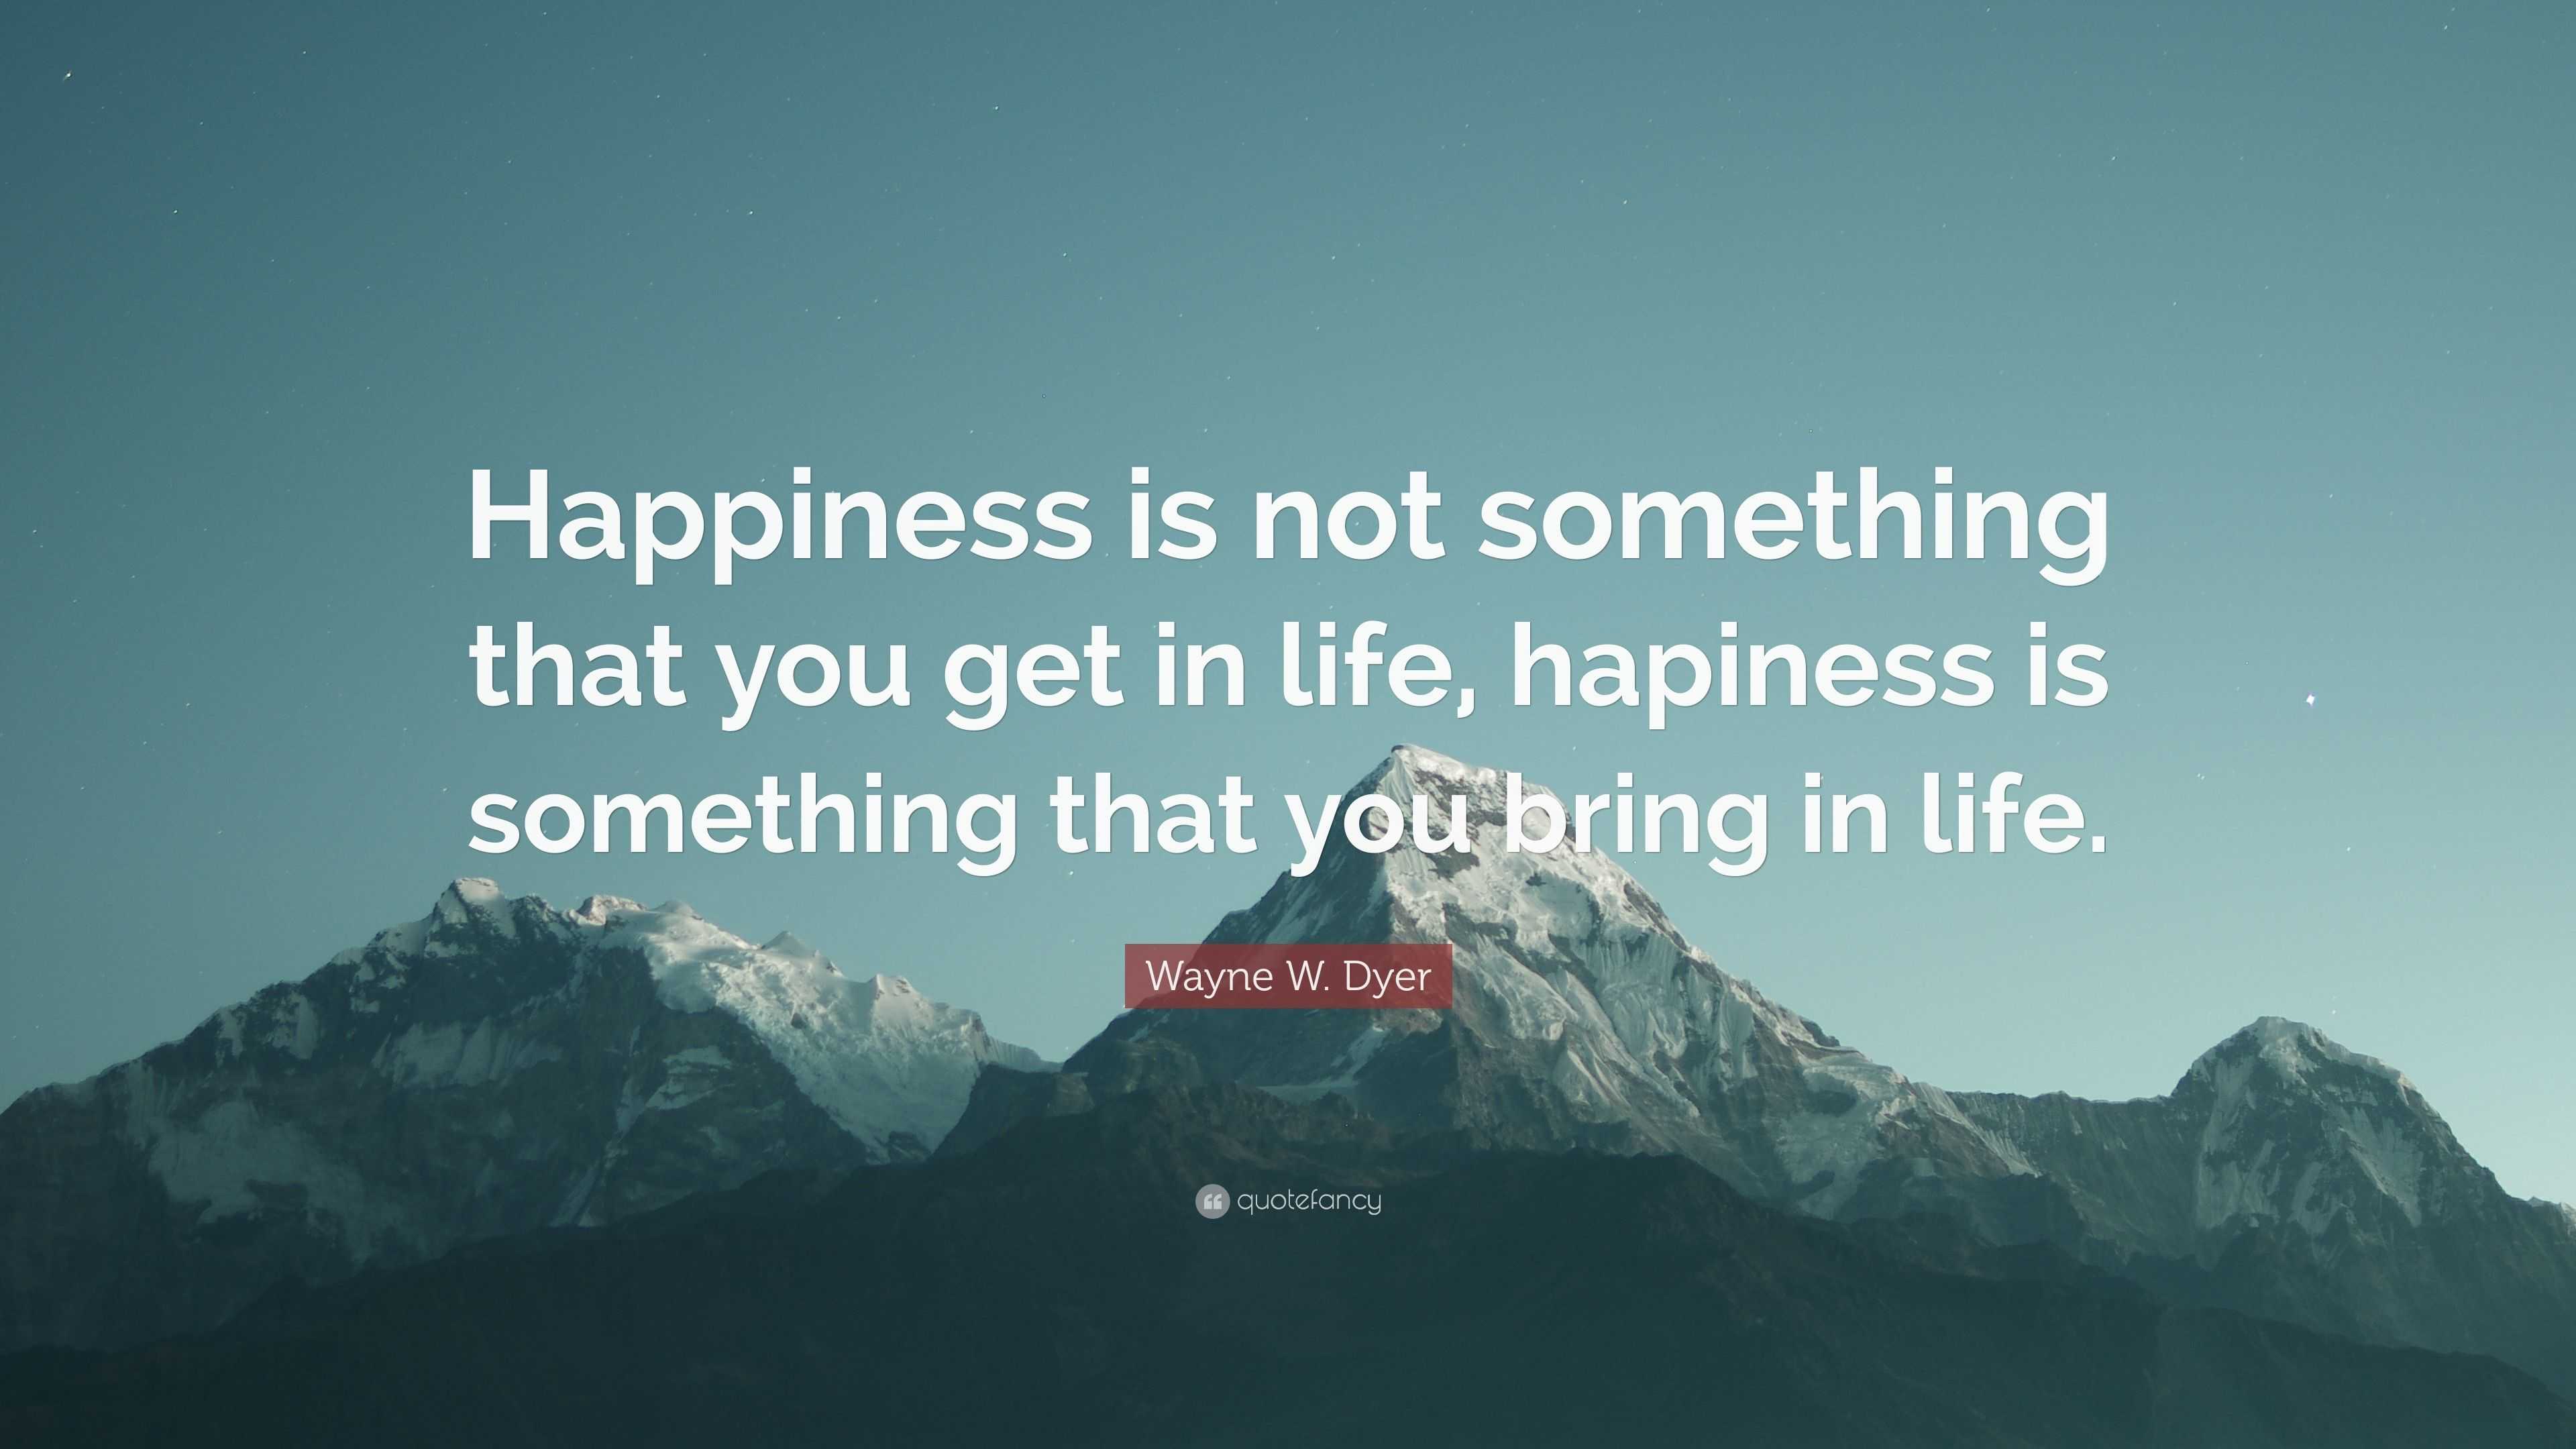 Wayne W. Dyer Quote: “Happiness is not something that you get in life ...